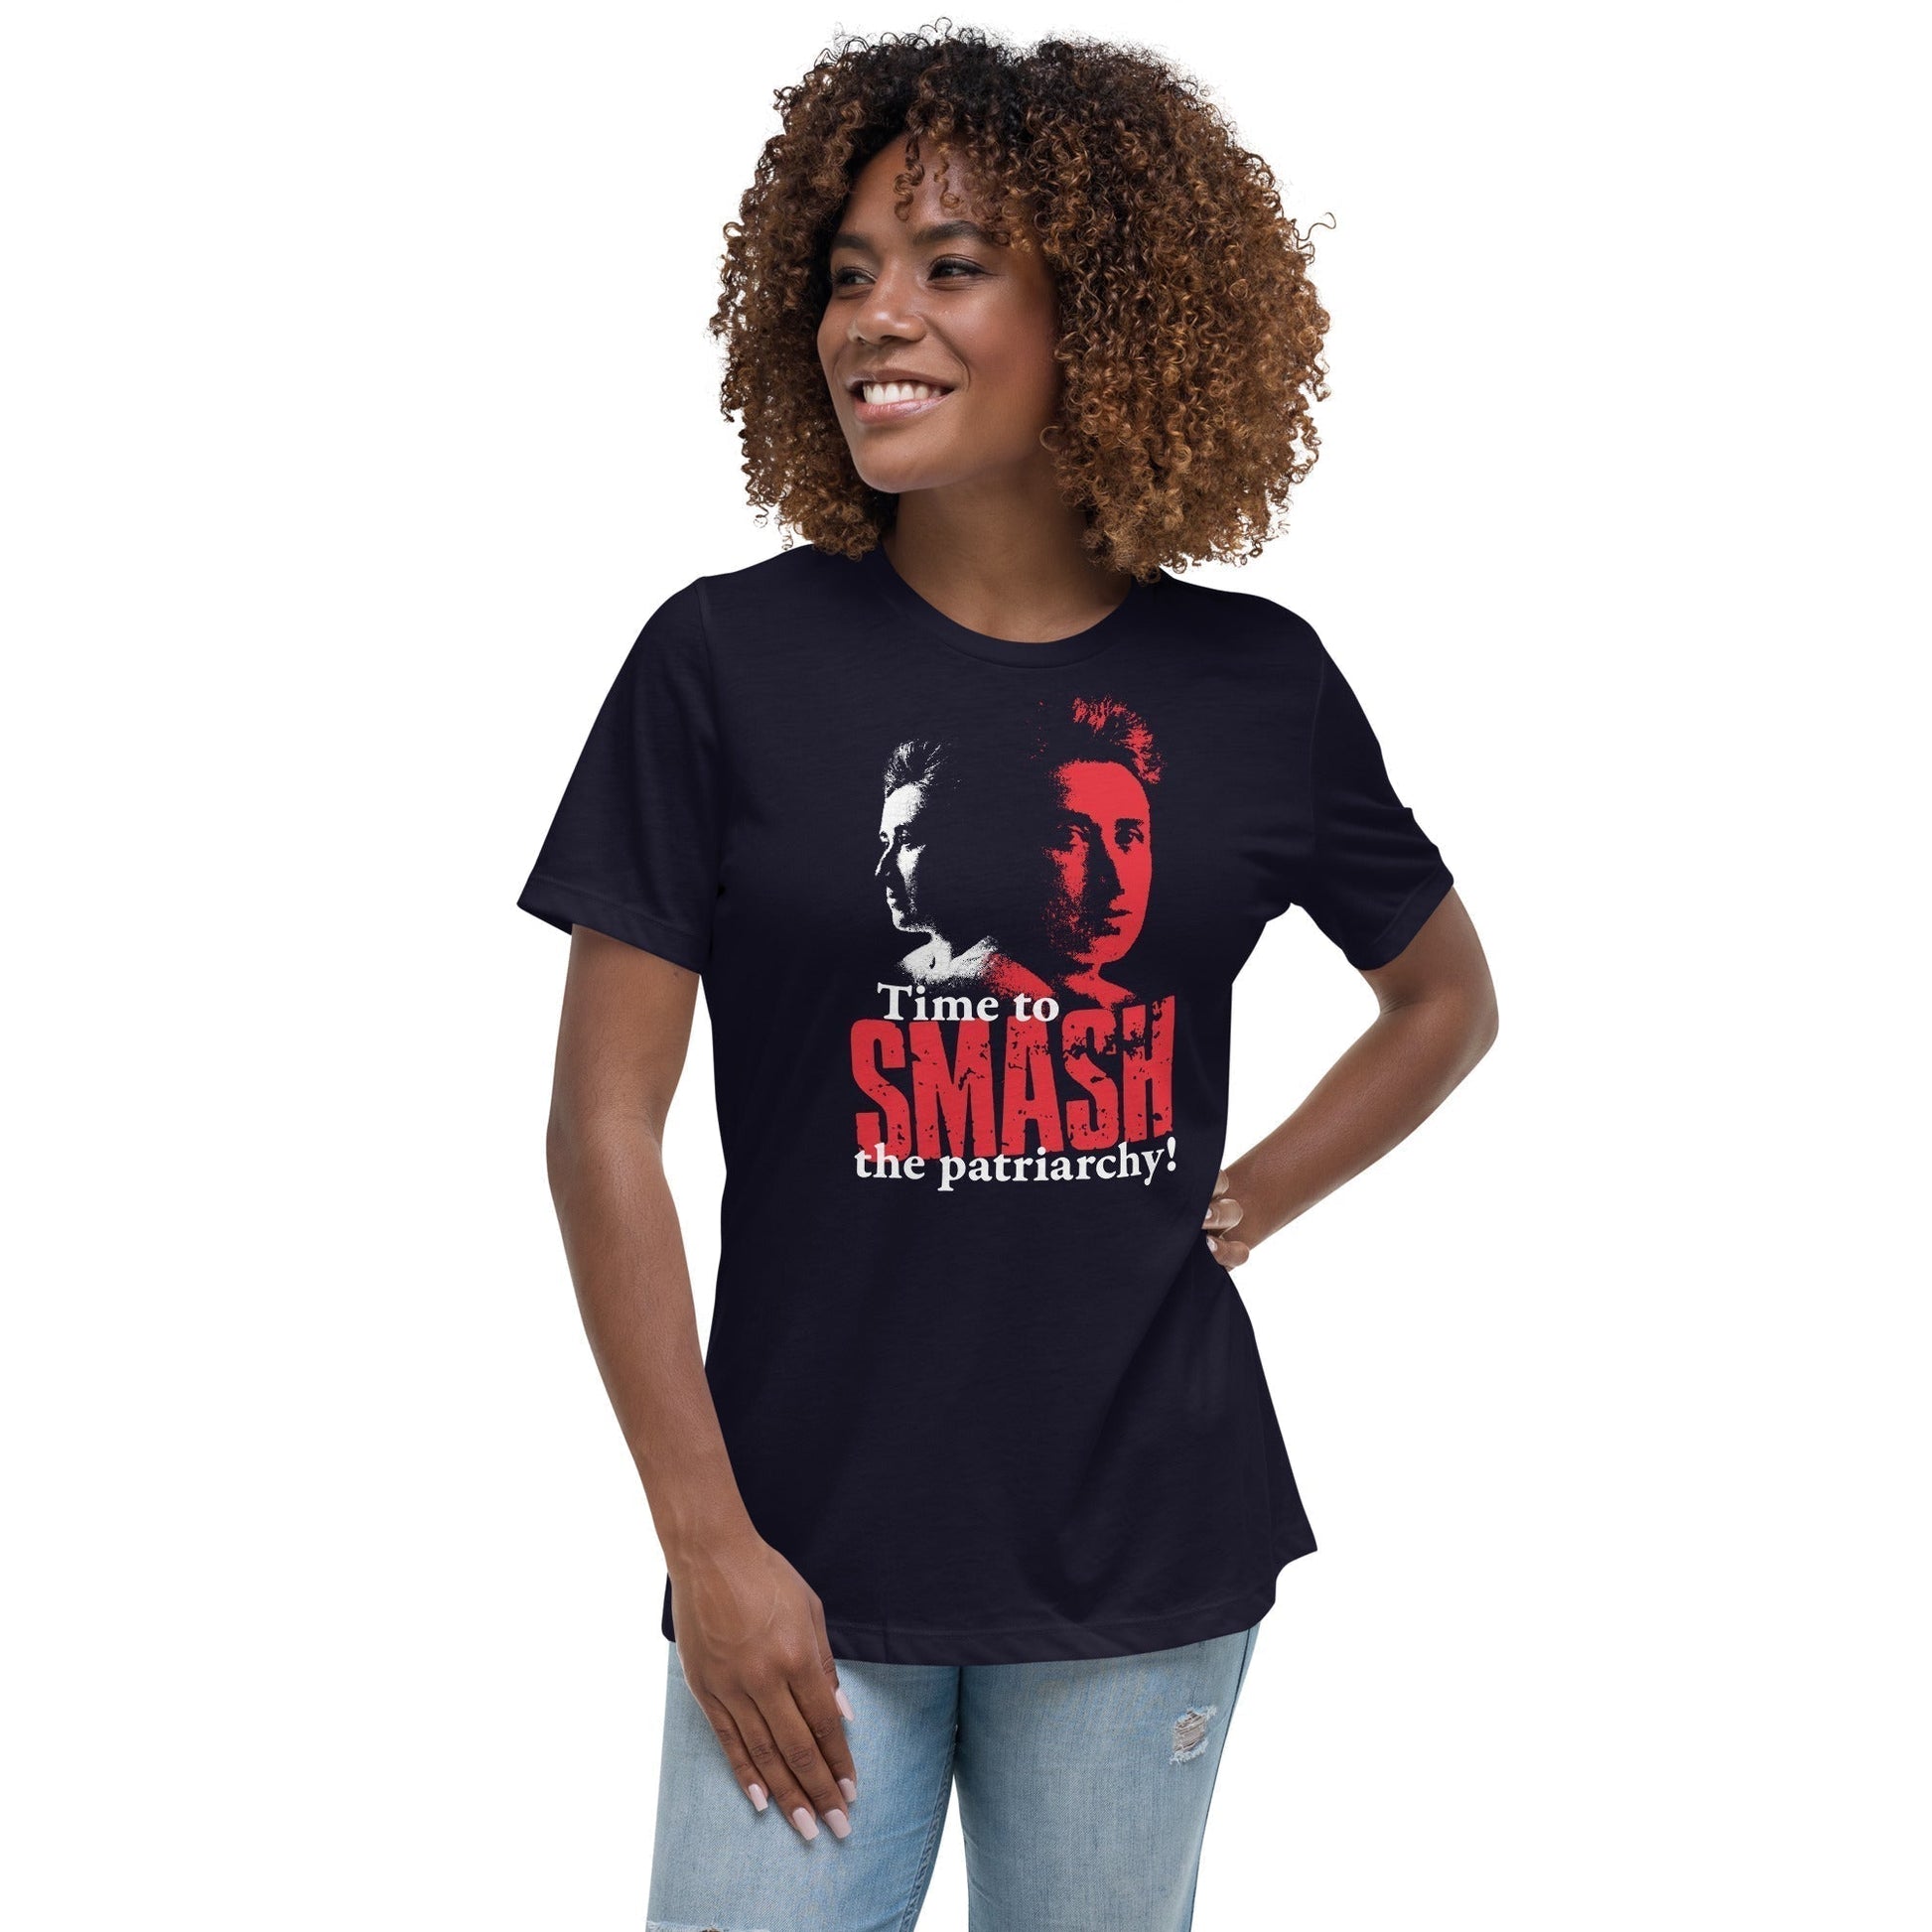 Time to SMASH the patriarchy! by Rosa Luxemburg - Women's T-Shirt